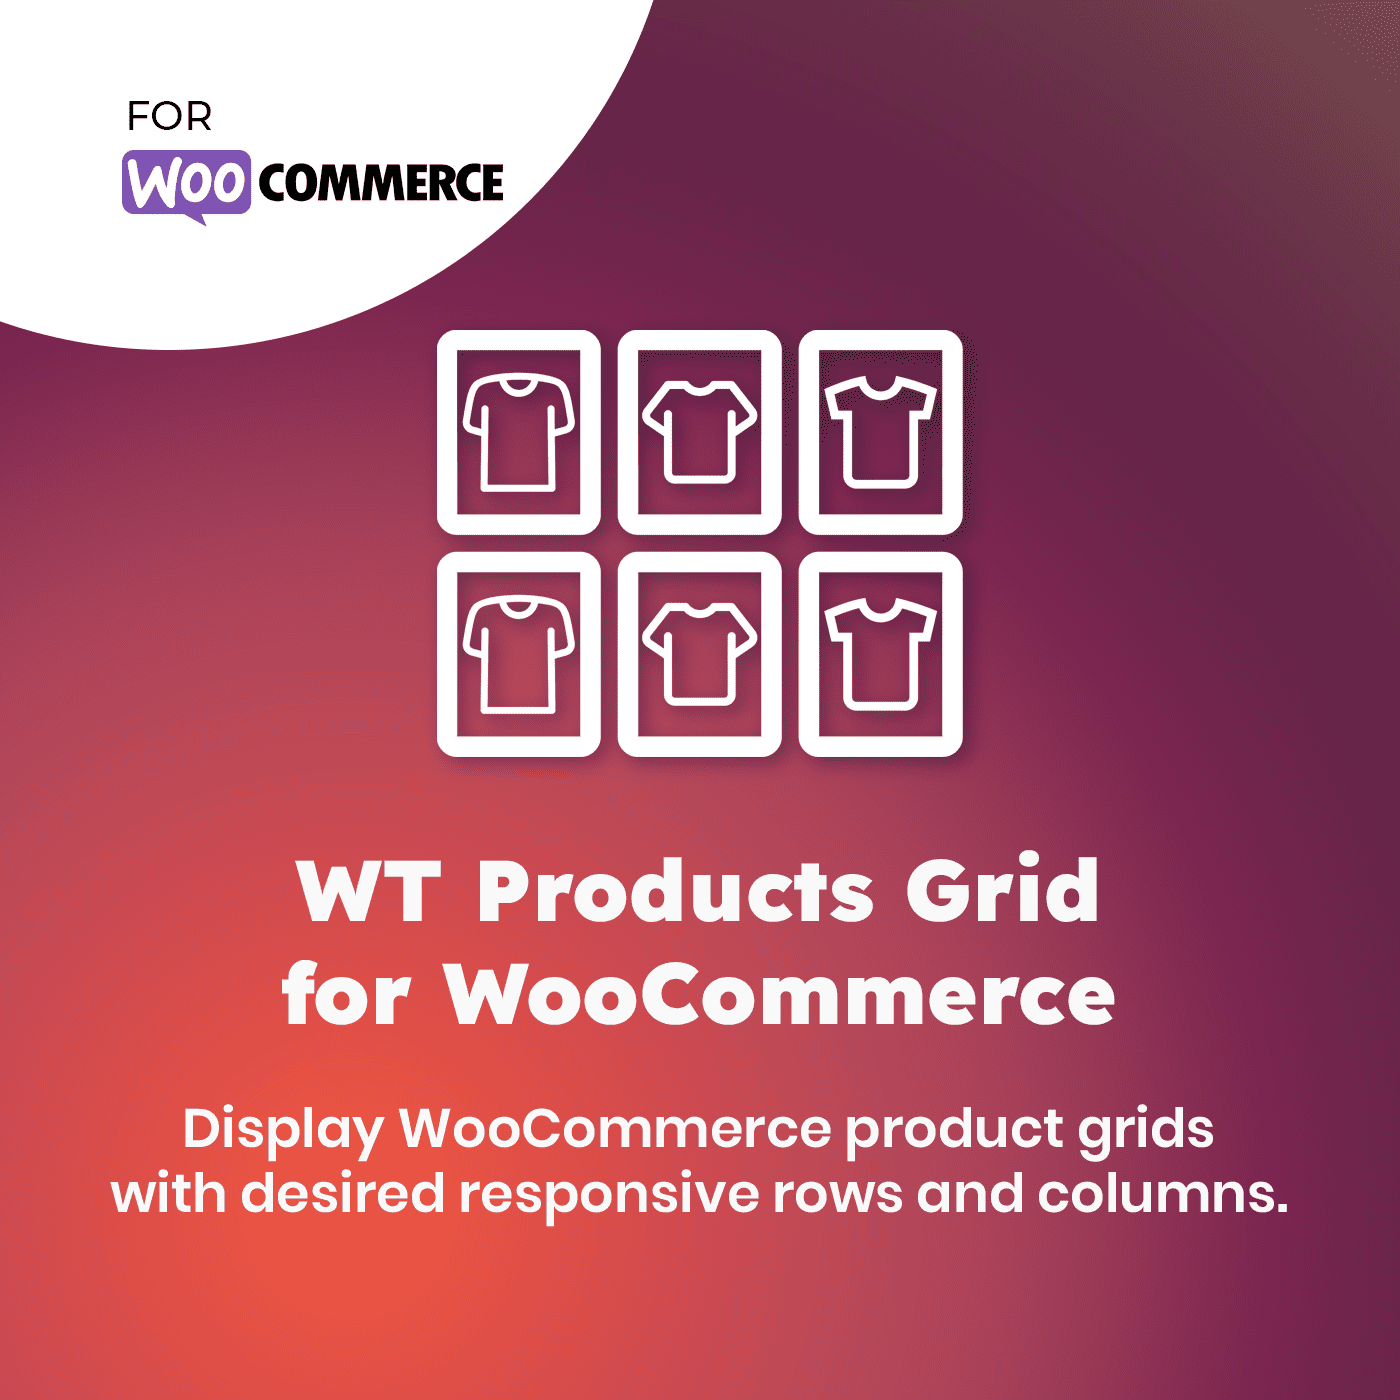 WT Products Grid for WooCommerce - WordPress Plugin for WooCommerce